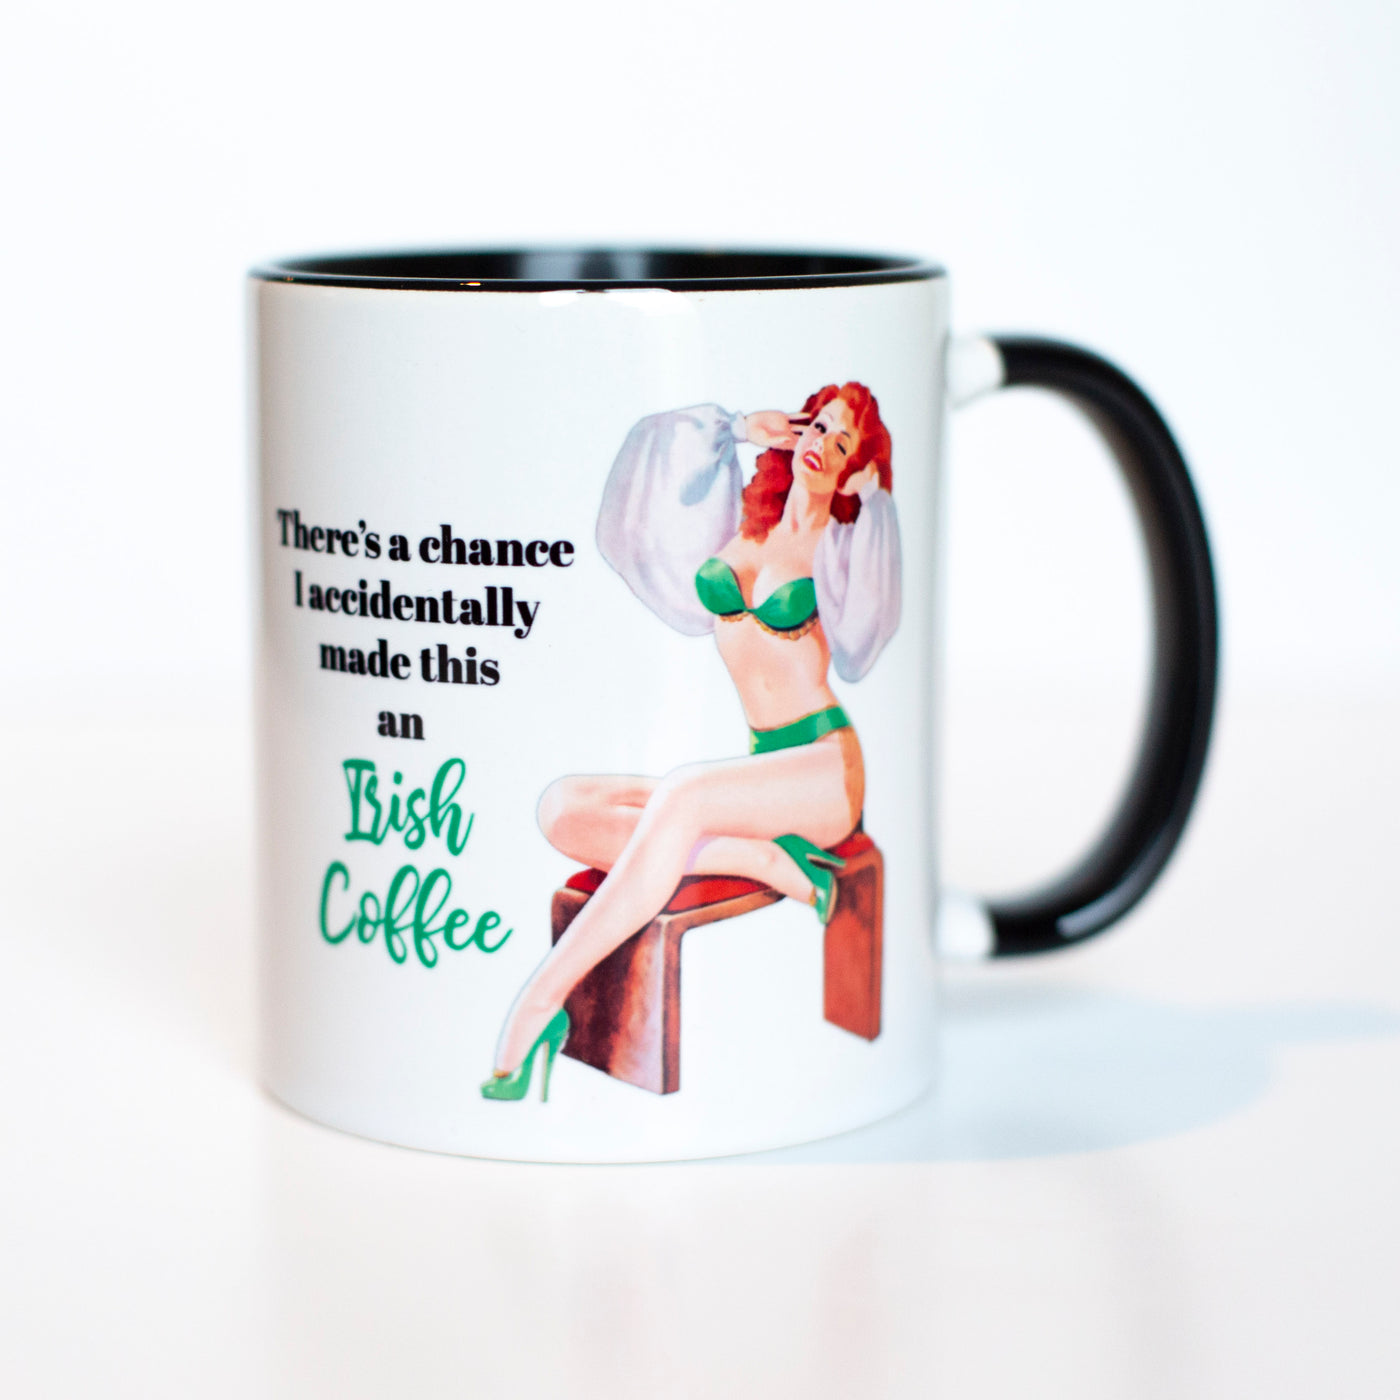 vintage pinup "theres a chance this is irish coffee" funny two tone coffee mug great for st patricks day, co-worker gift, girl gift or spring birthday presents